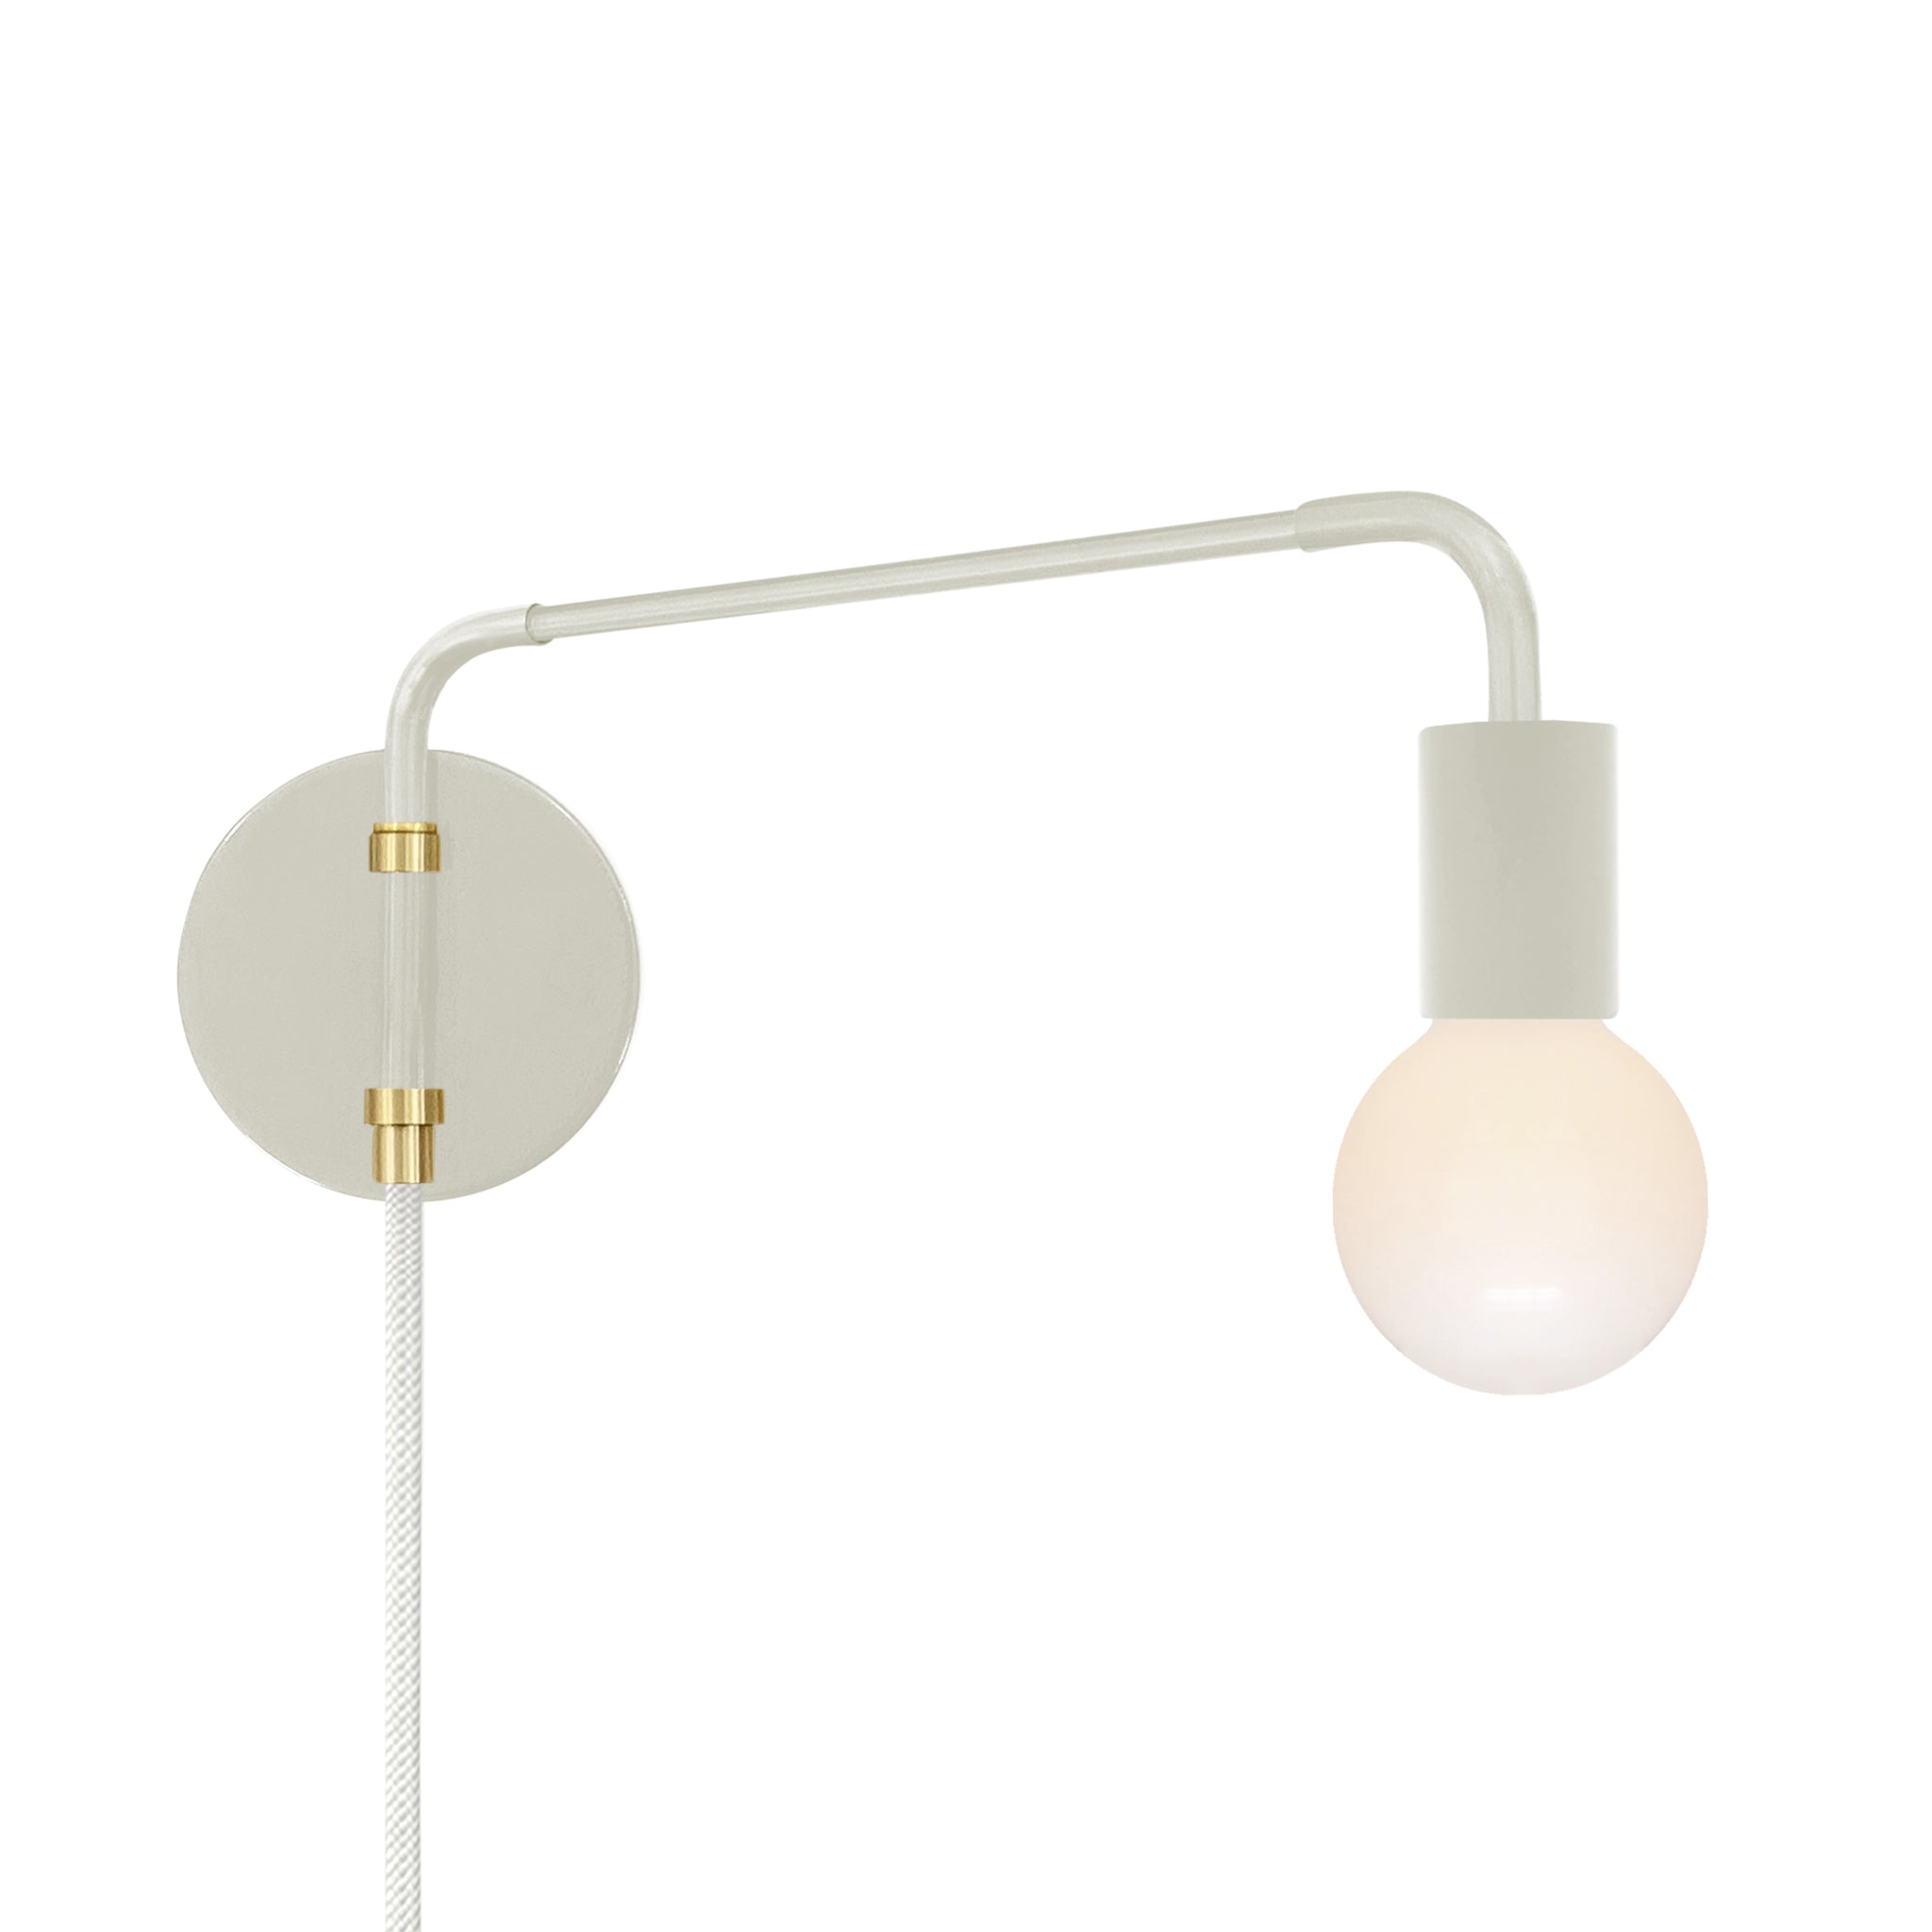 Brass and bone color Sway plug-in sconce Dutton Brown lighting